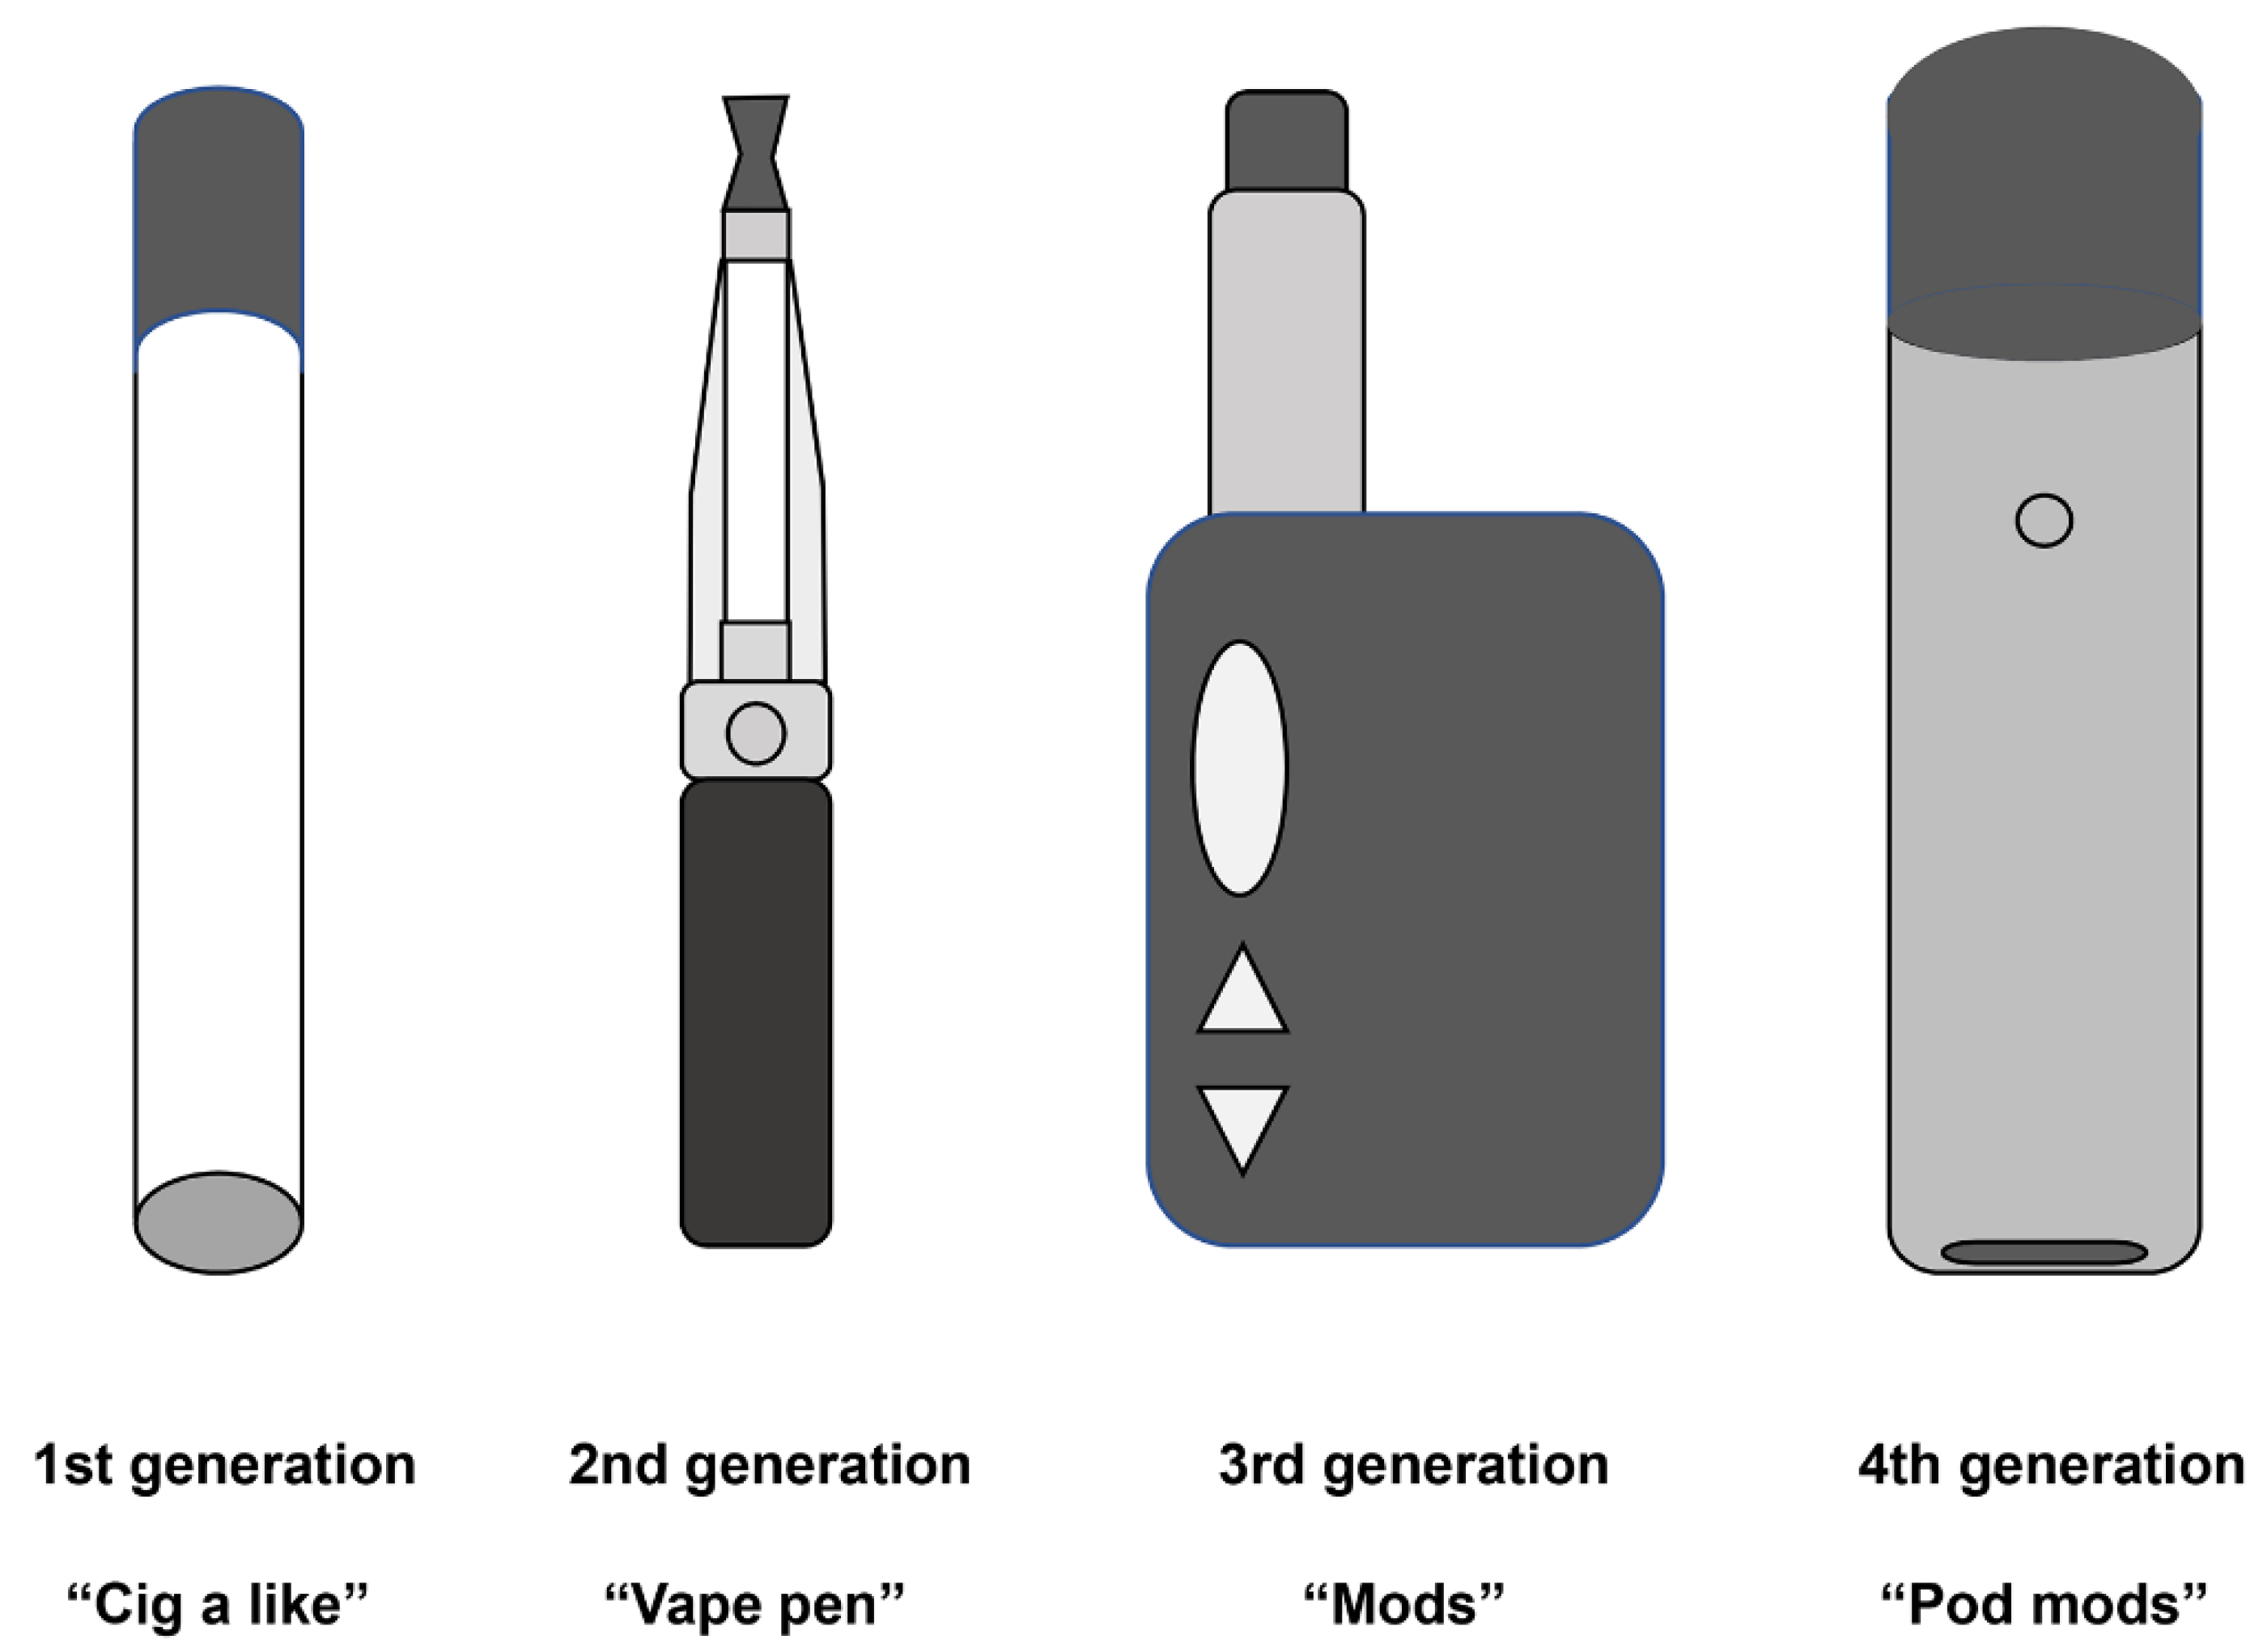 In Vitro Toxicological Investigation and Risk Assessment of E-Cigarette  Aerosols Based on a Novel Solvent-Free Extraction Method